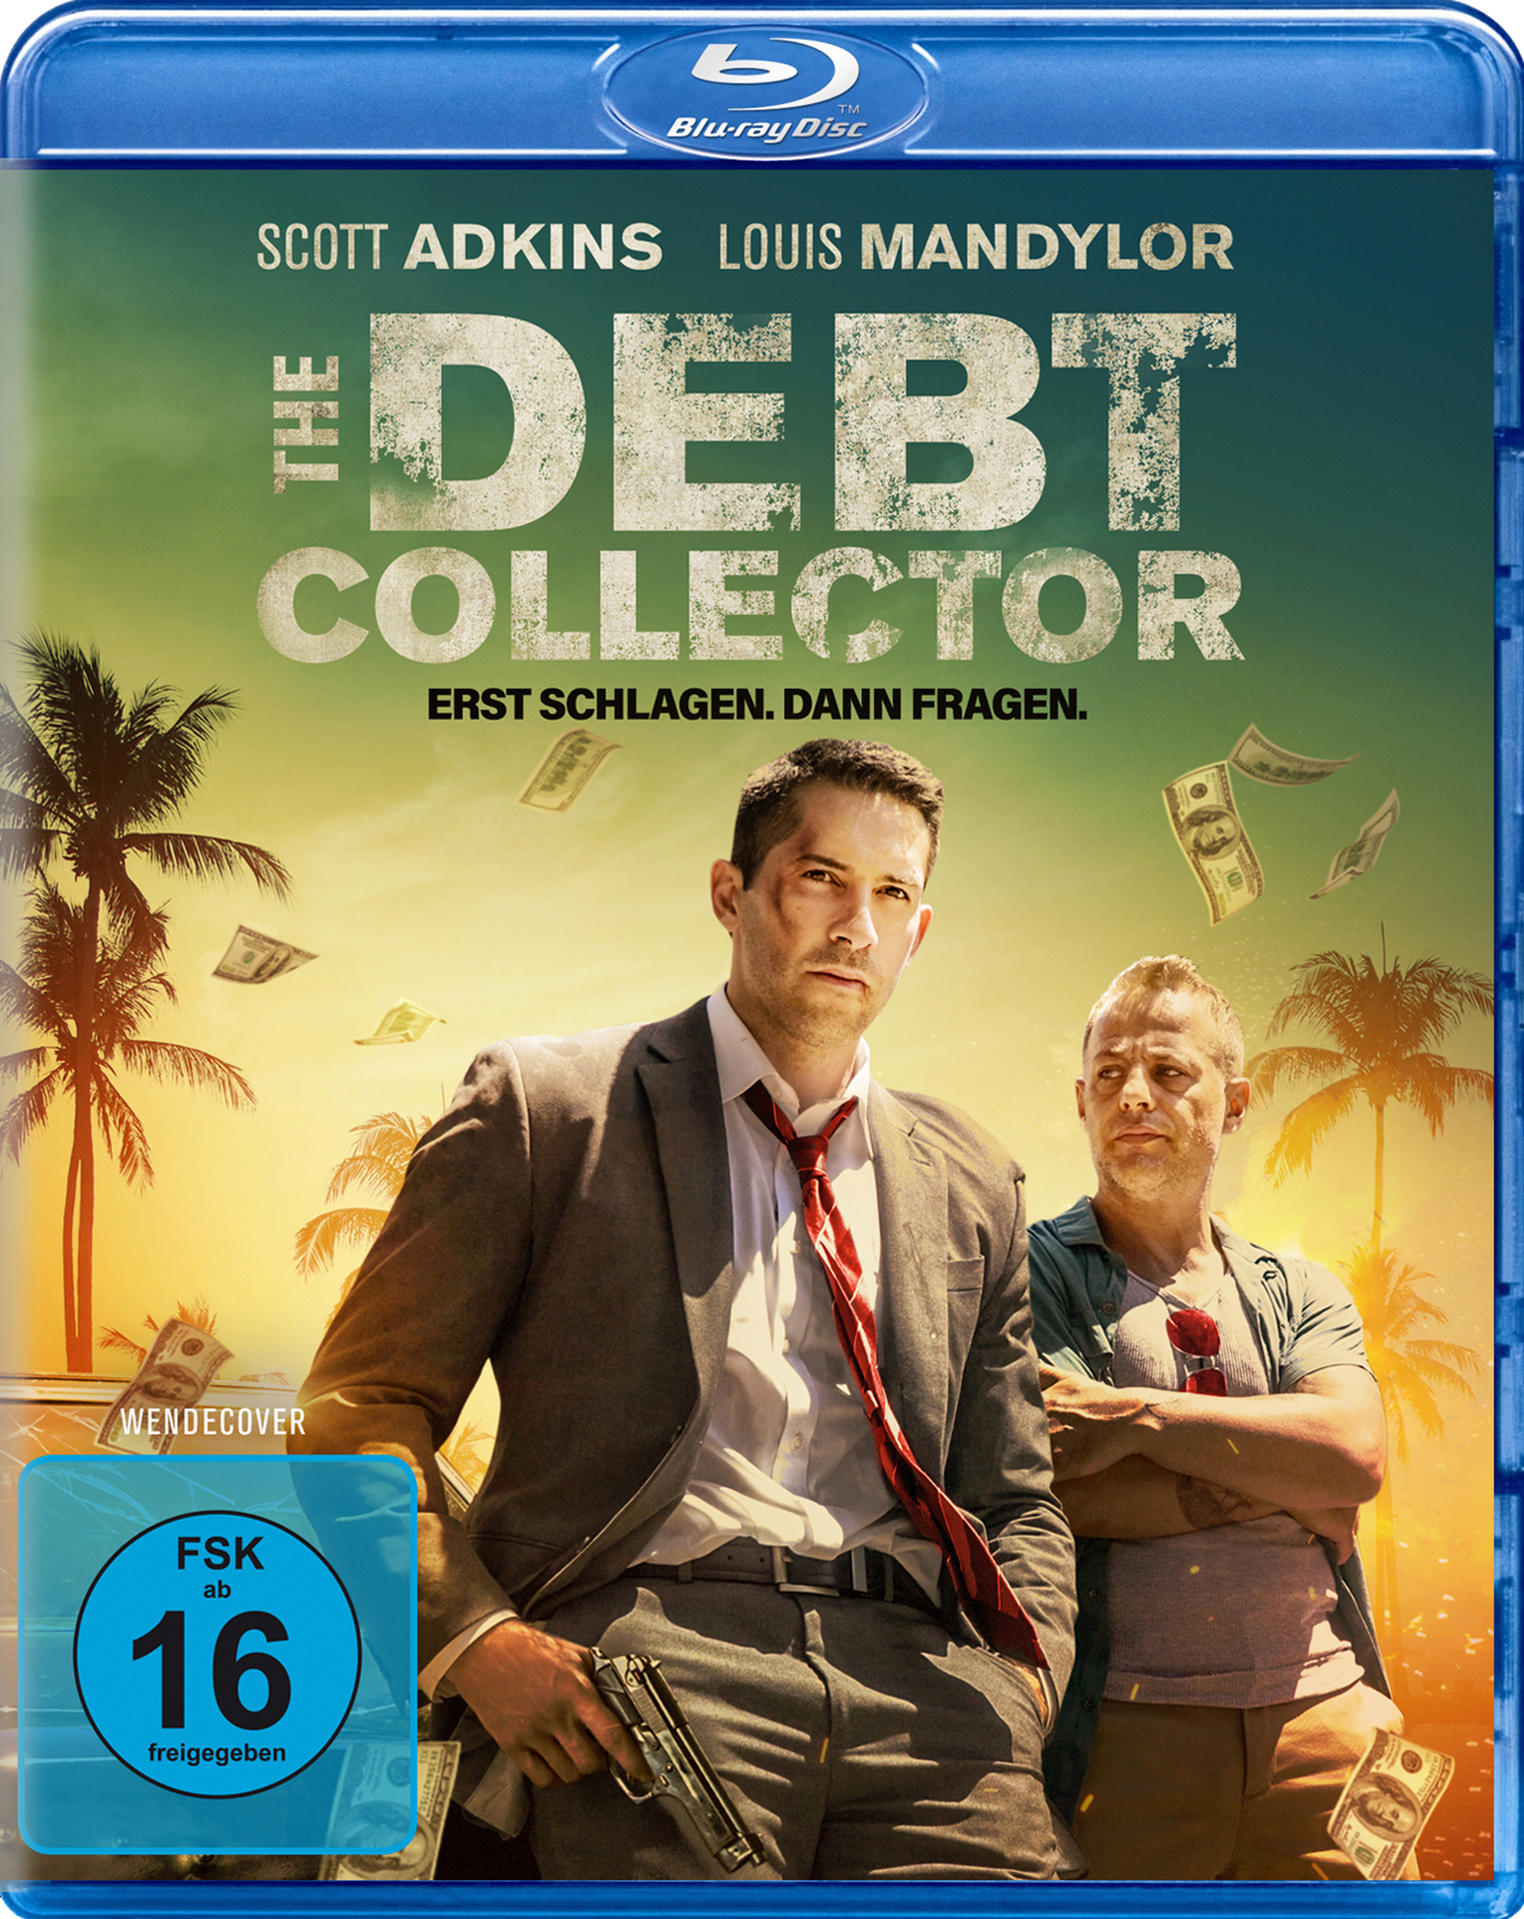 The Collector Blu-ray Debt